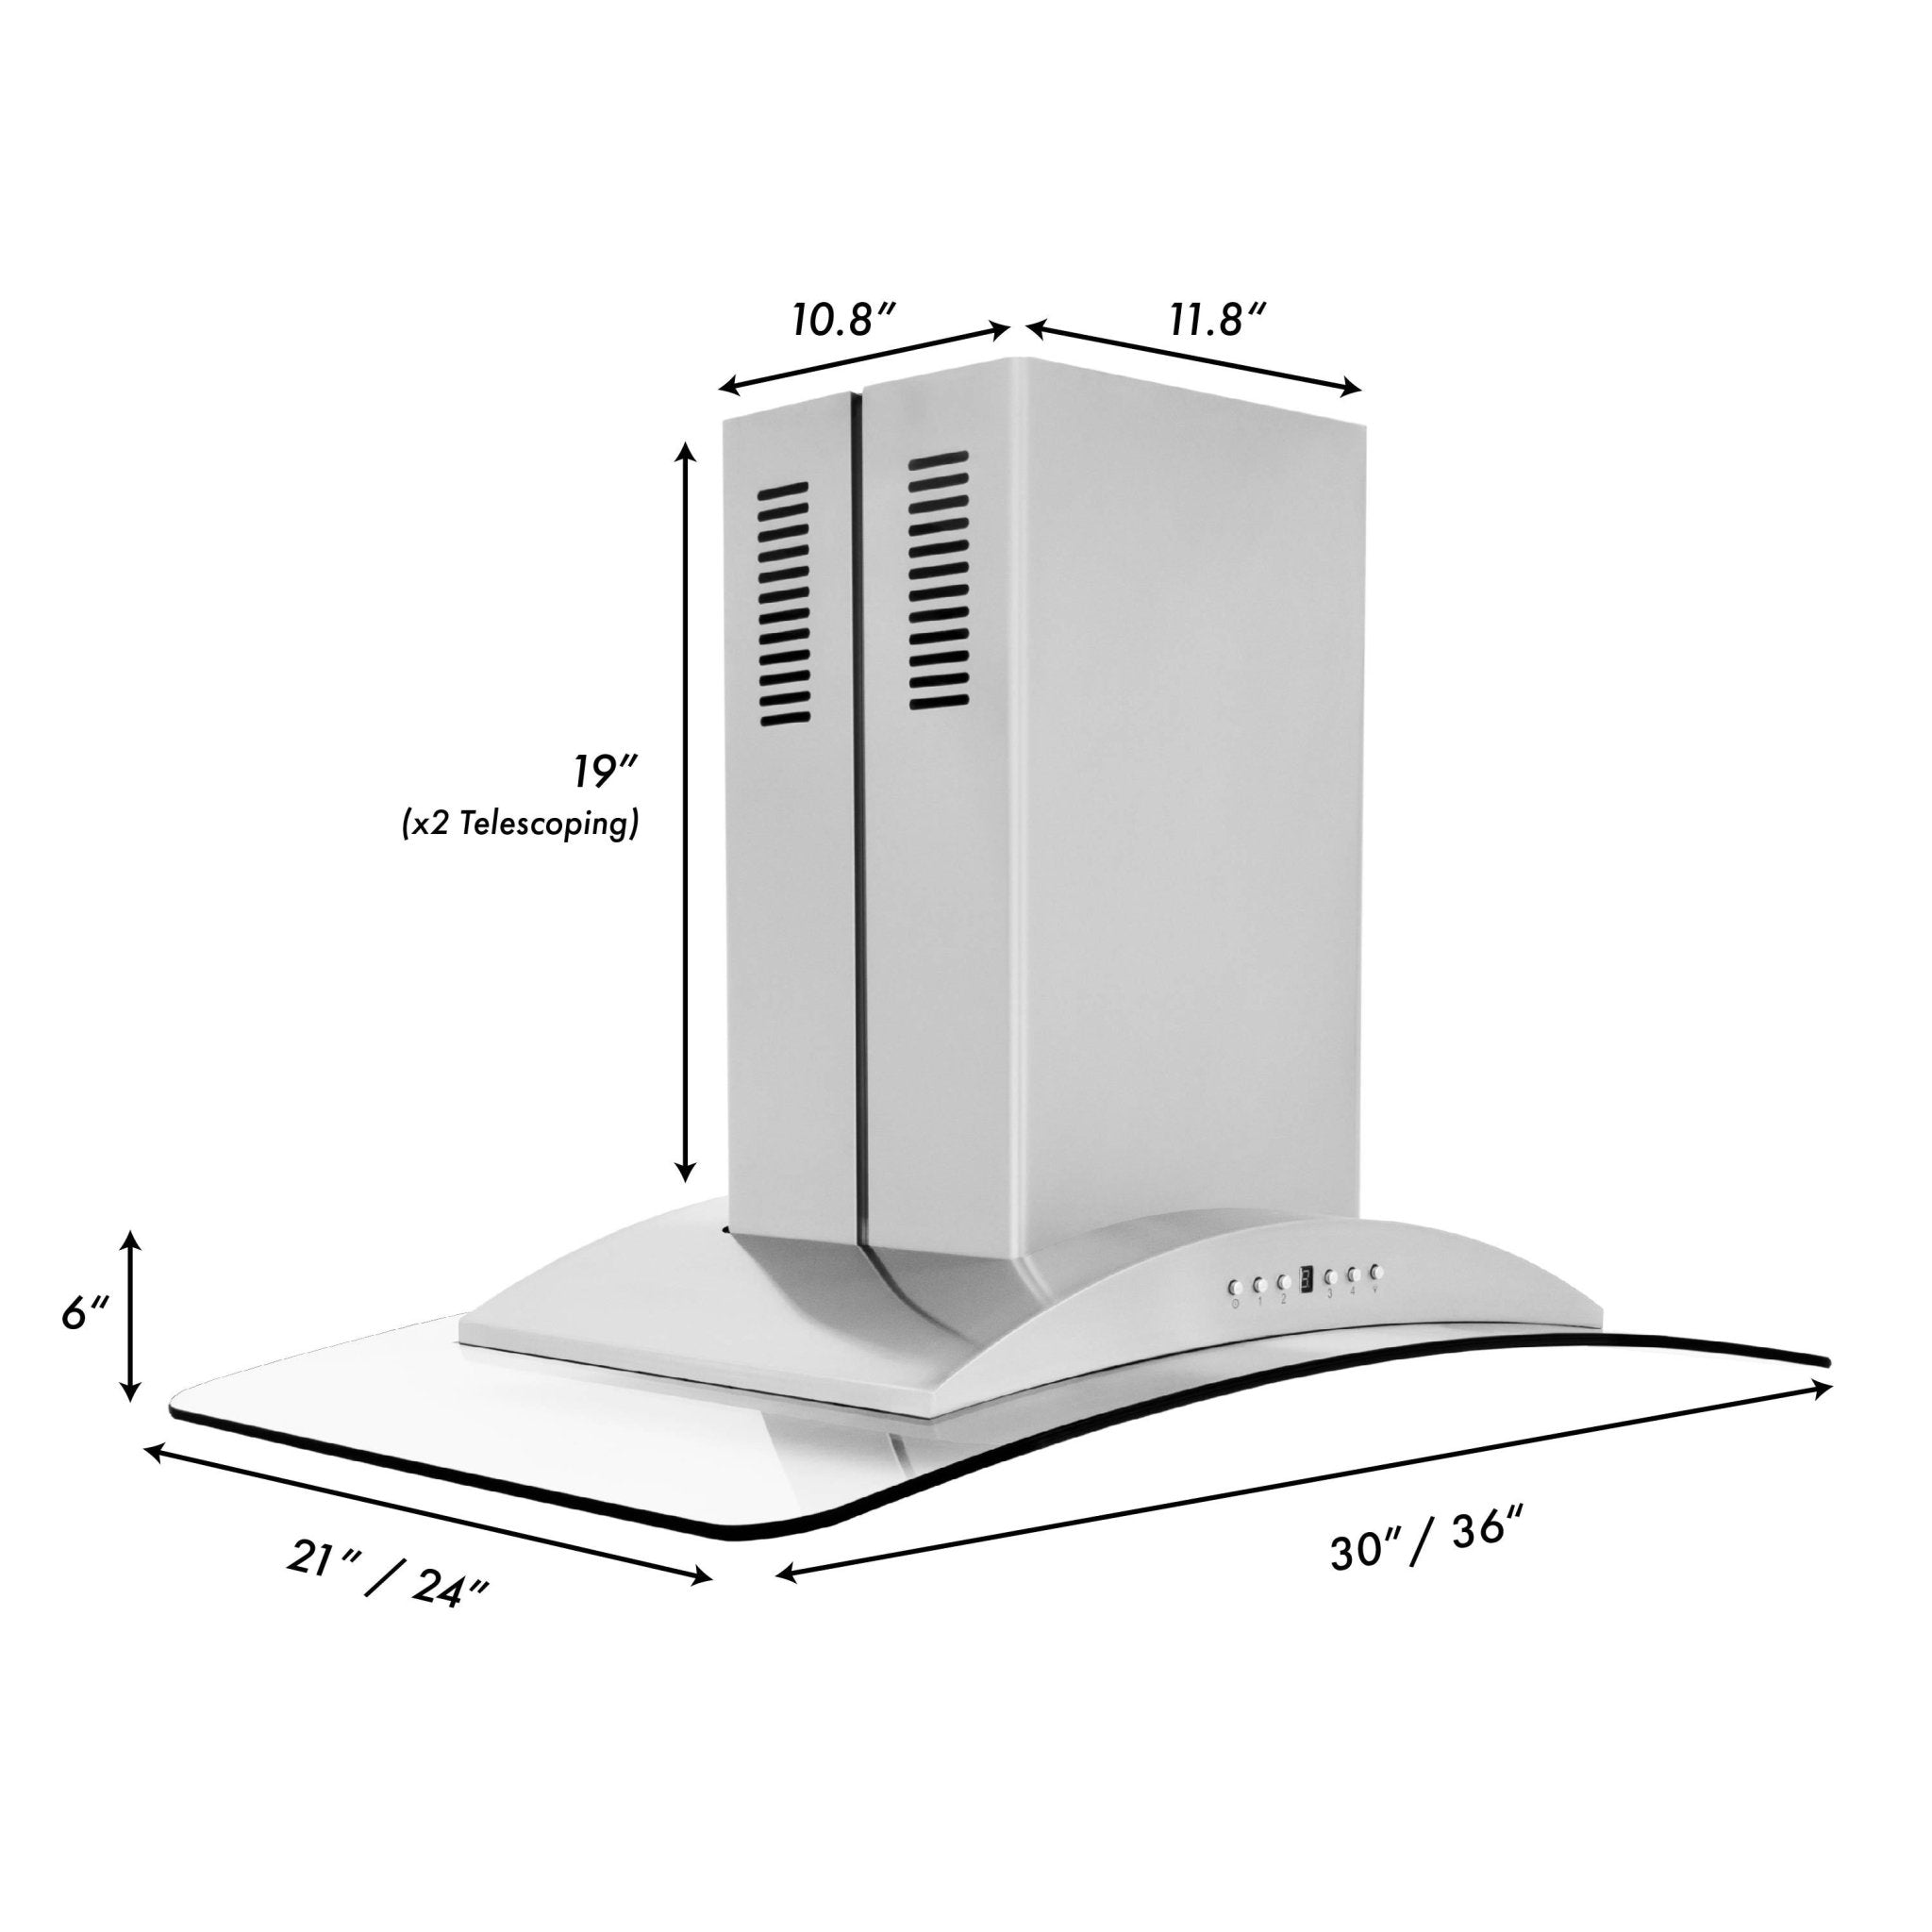 ZLINE Convertible Vent Island Mount Range Hood in Stainless Steel and Glass (GL9i) dimensional and measurements.